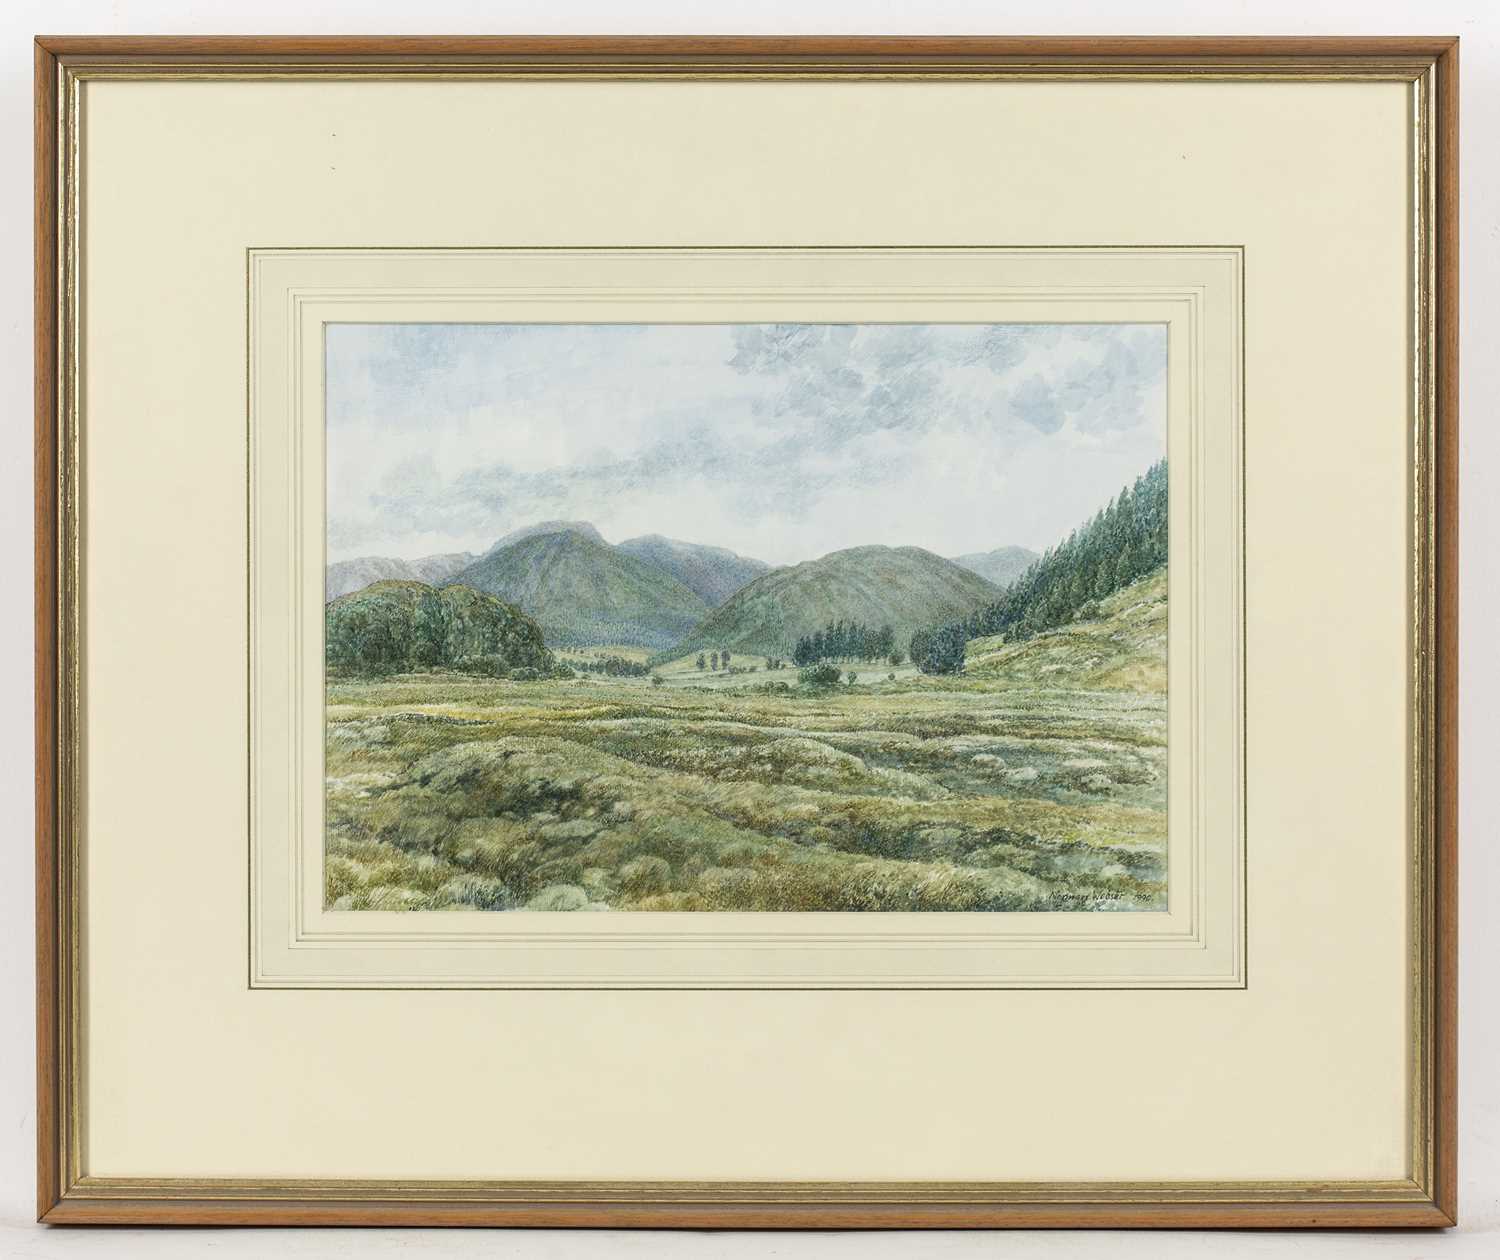 Norman Webster (20th century) 'Mountains near Inversheil, Wester Ross', signed and dated 1990, - Image 2 of 3